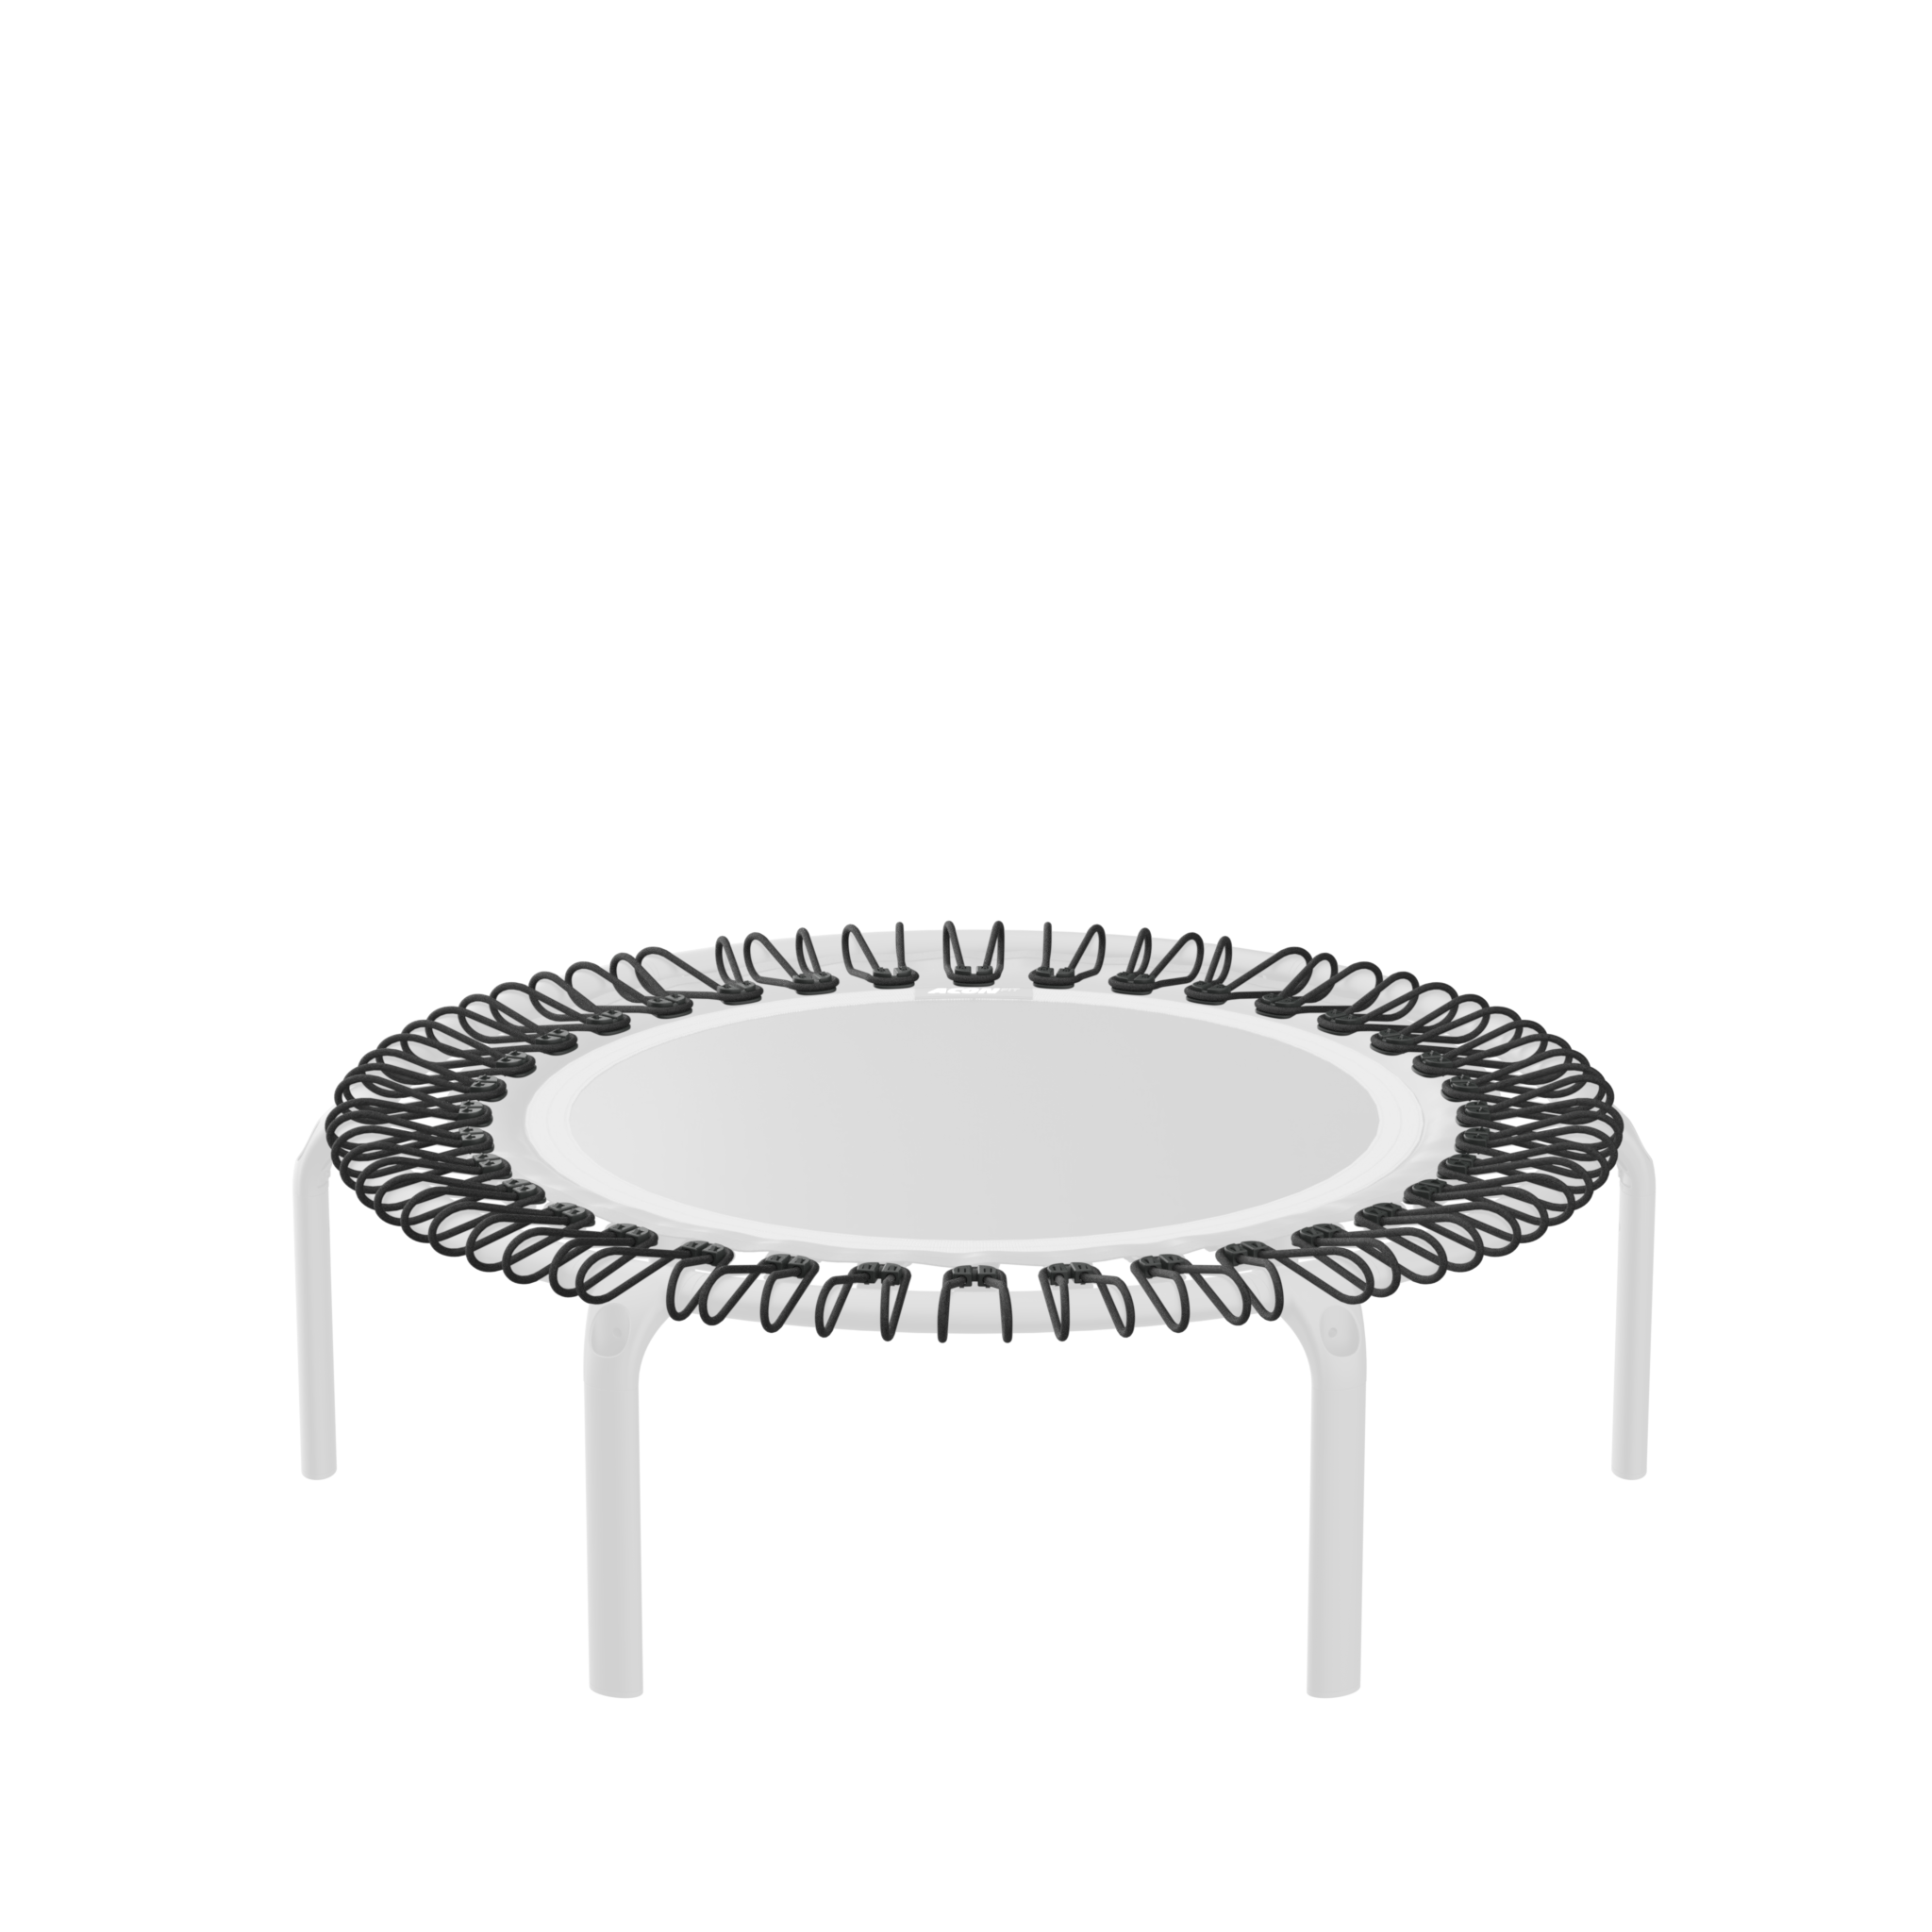 ACON FIT trampoline on a white background with the bungees highlighted